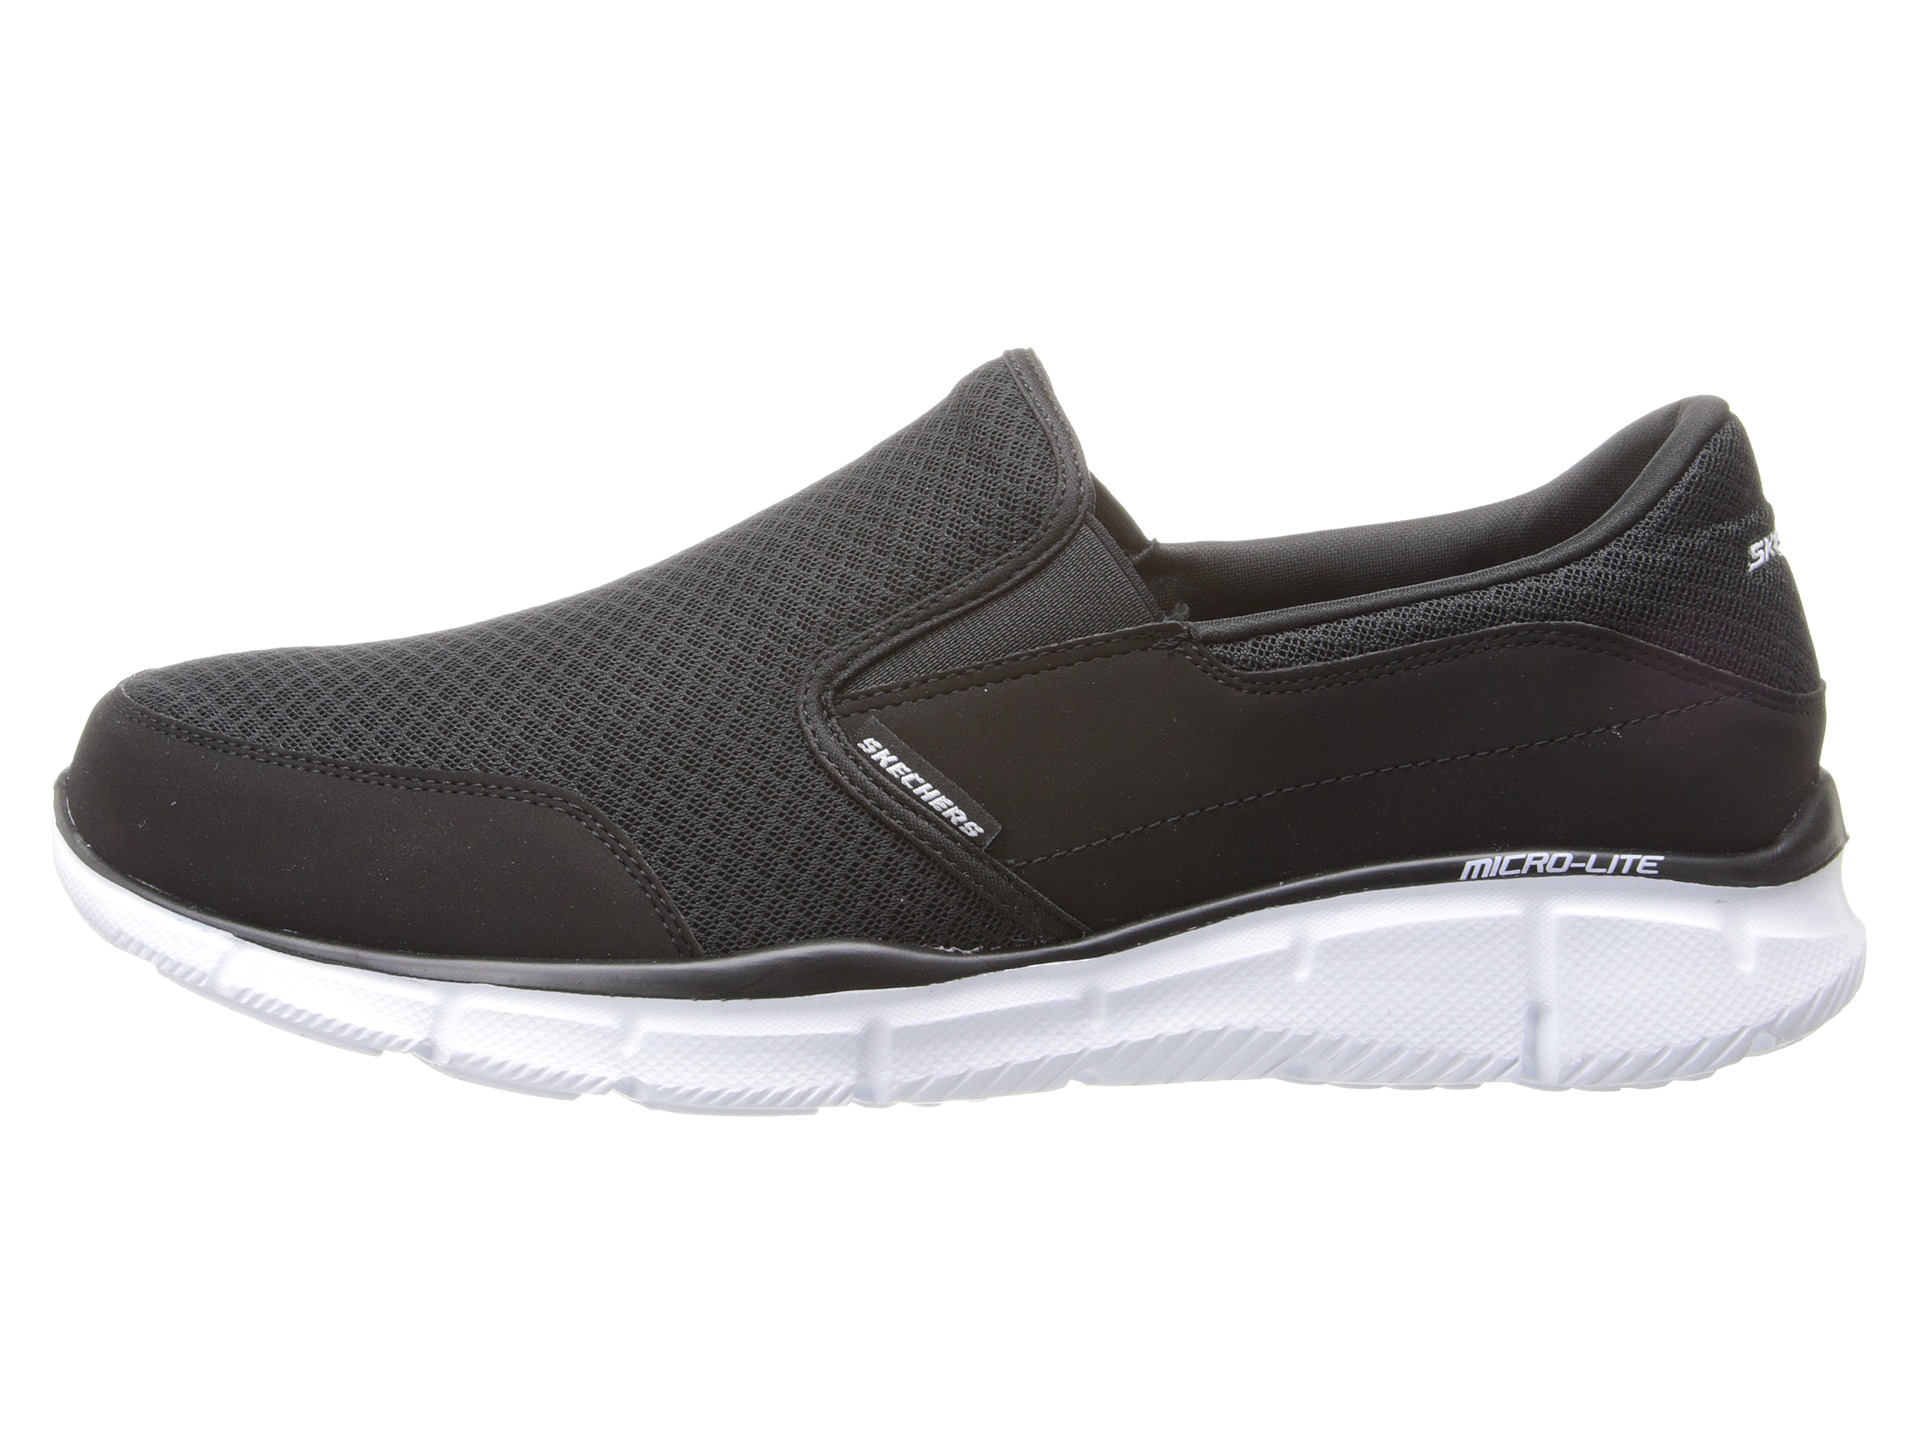 SKECHERS Equalizer Persistent - Zappos.com Free Shipping BOTH Ways